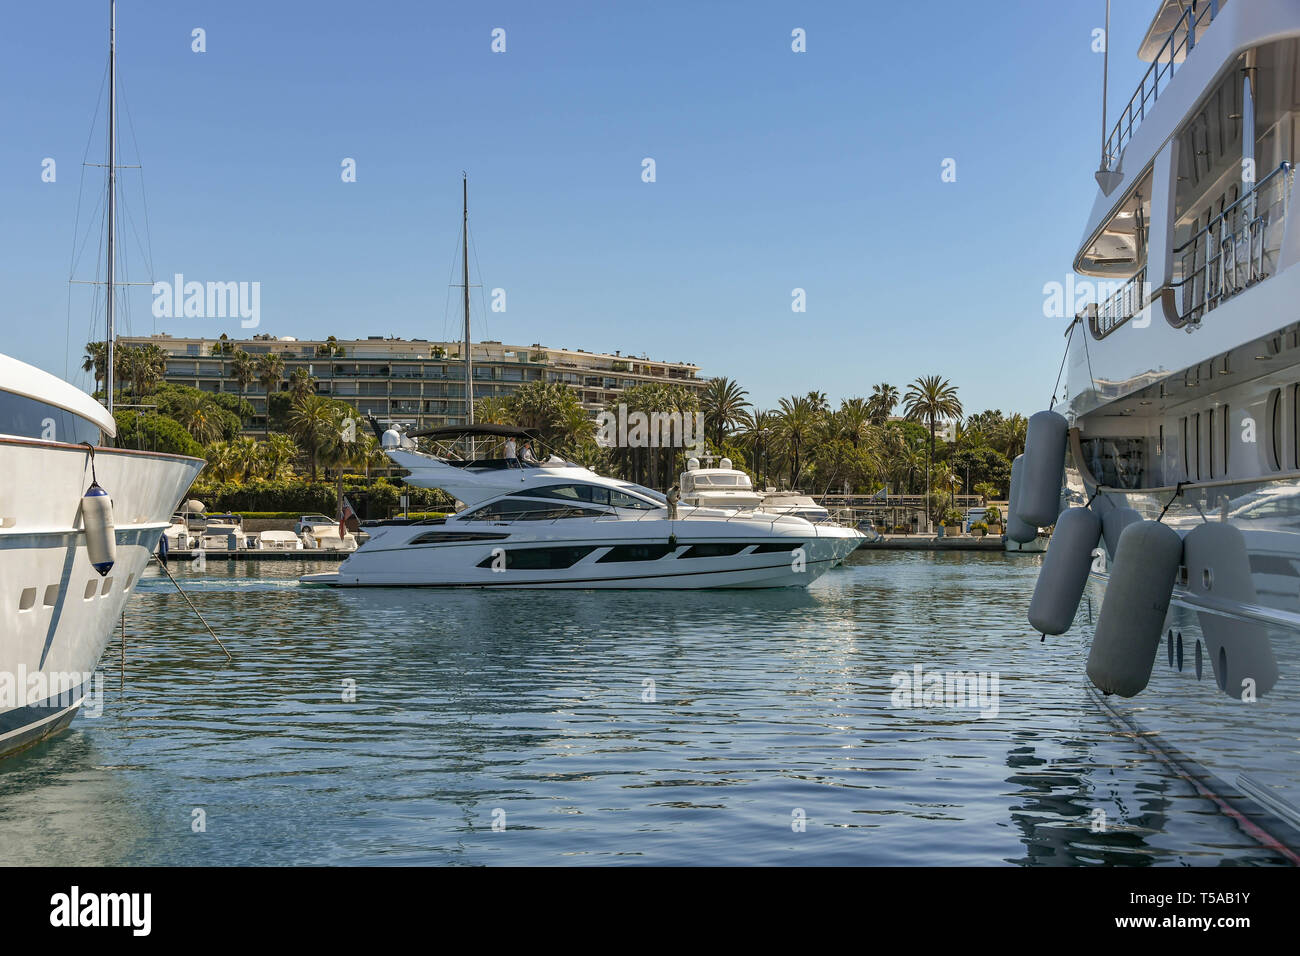 CANNES, Francia - Aprile 2019: luxury motor cruiser in Port Pierre Canto marina in Cannes. Foto Stock